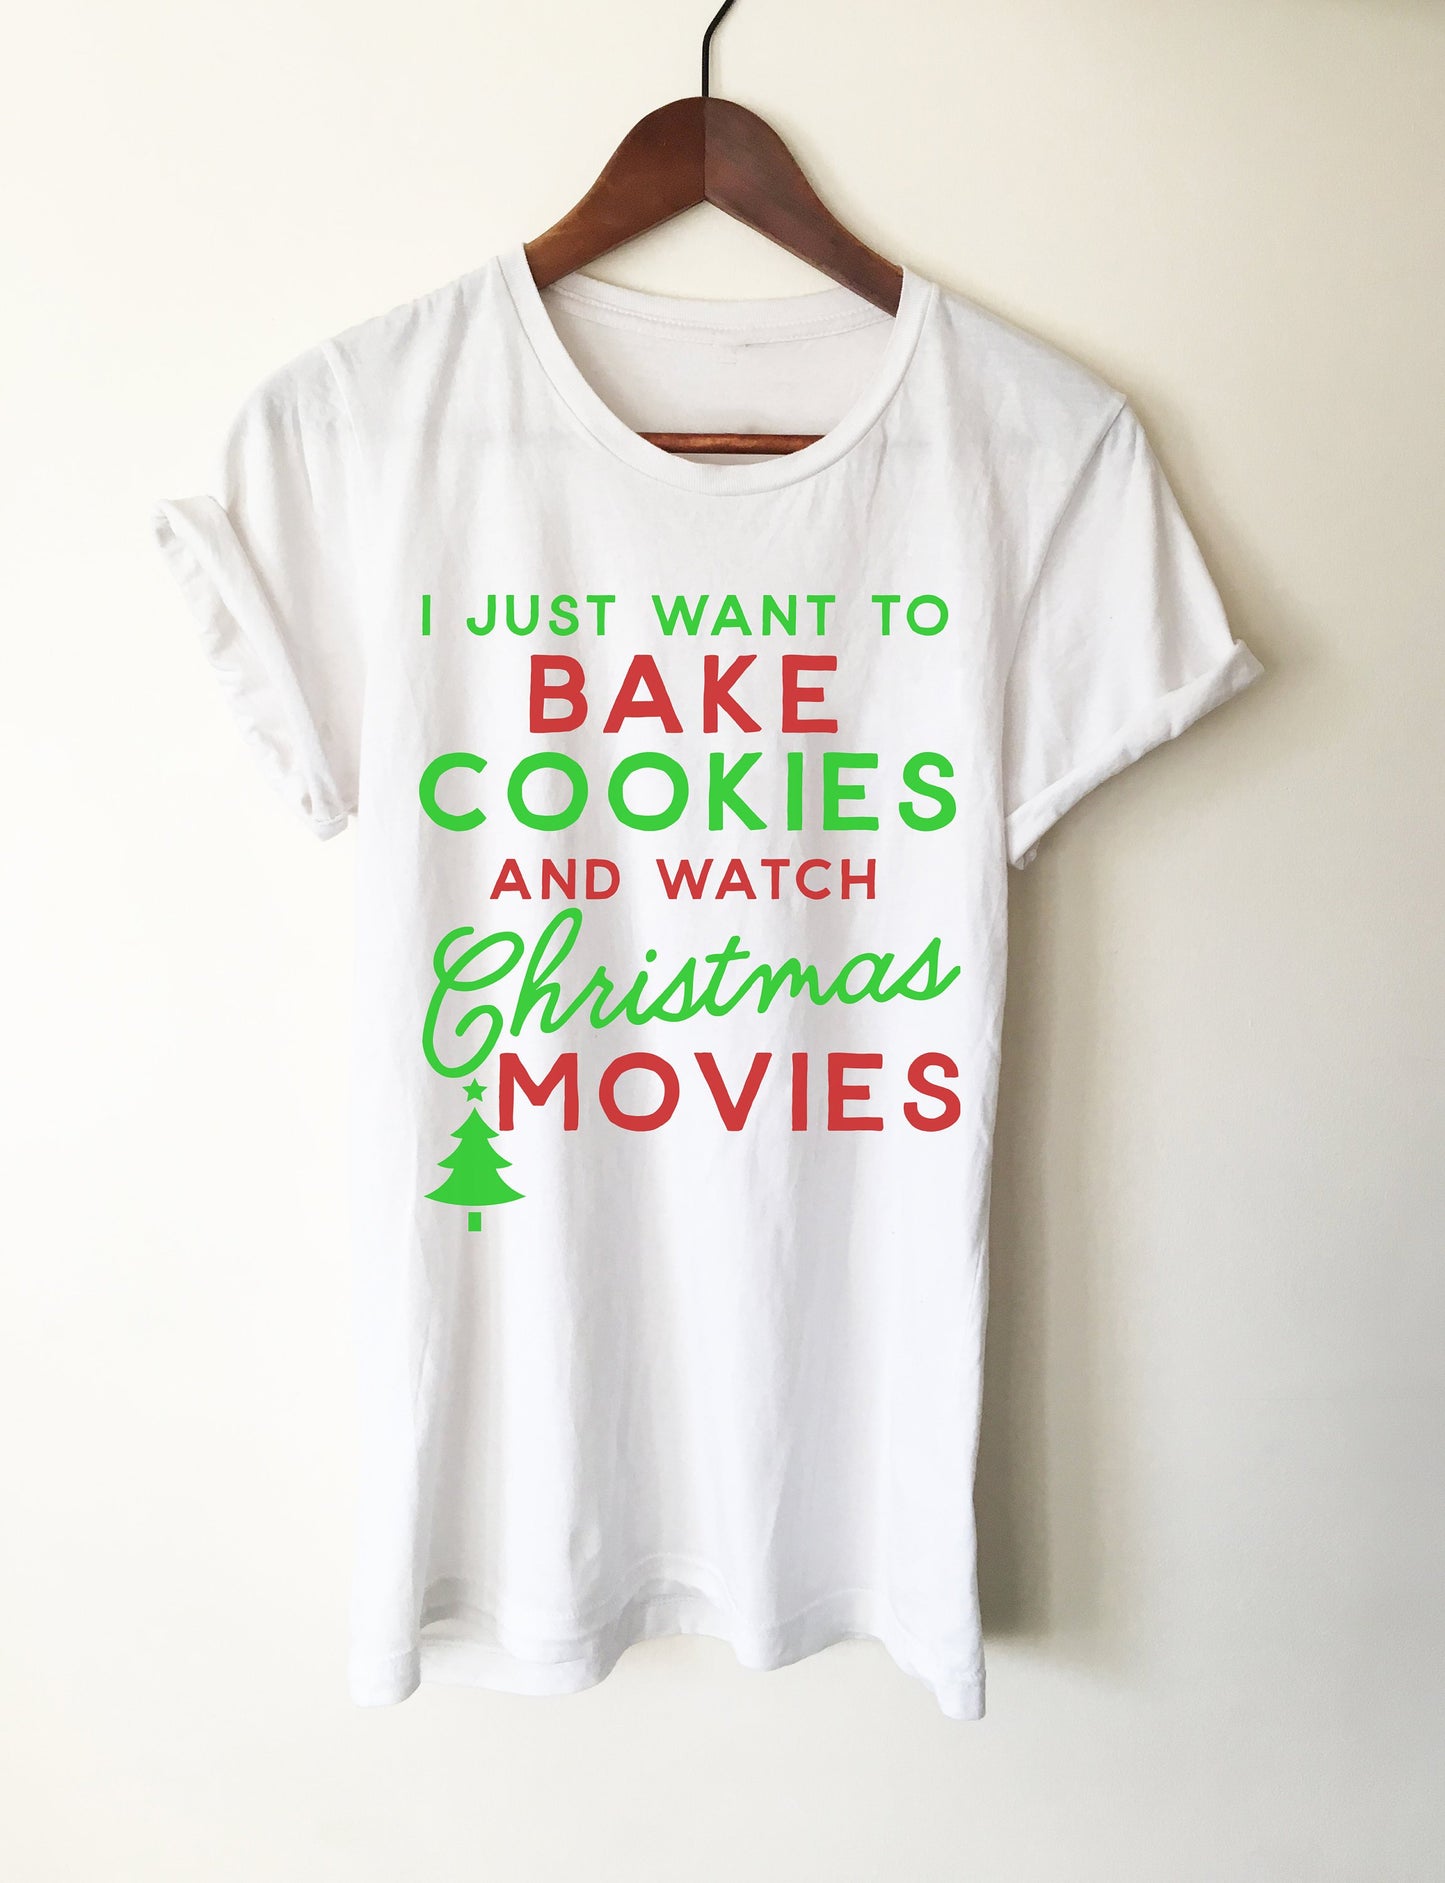 I Just Want To Bake Cookies And Watch Christmas Movies Unisex Shirt - Christmas gifts, Christmas gift, Baking Shirt, Cookie Shirt